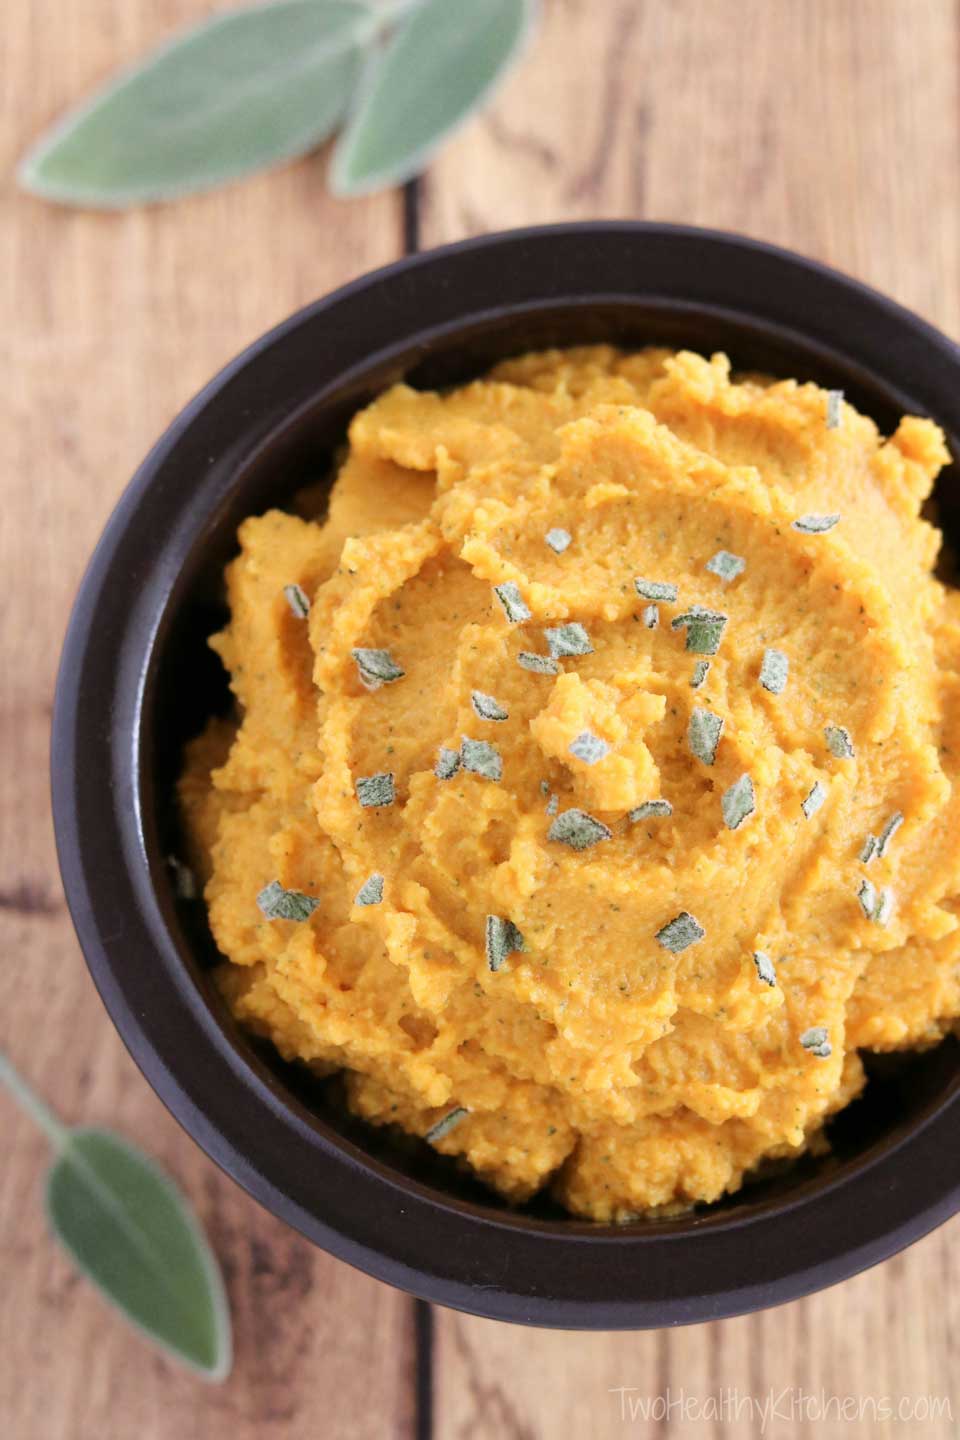 Just 5 ingredients, ready in 5 minutes flat! This delicious Savory Pumpkin Hummus is filled with the rich, comforting flavors of pumpkin and sage. It's an ideal Halloween snack, Thanksgiving appetizer, or holiday hors d’oeuvre. A quick, healthy appetizer recipe that can even be made ahead! Perfect for parties, and for snacking – a healthy hummus recipe that’s great anytime! If you’re looking for pumpkin recipes, this is a must-try! | www.TwoHealthyKitchens.com